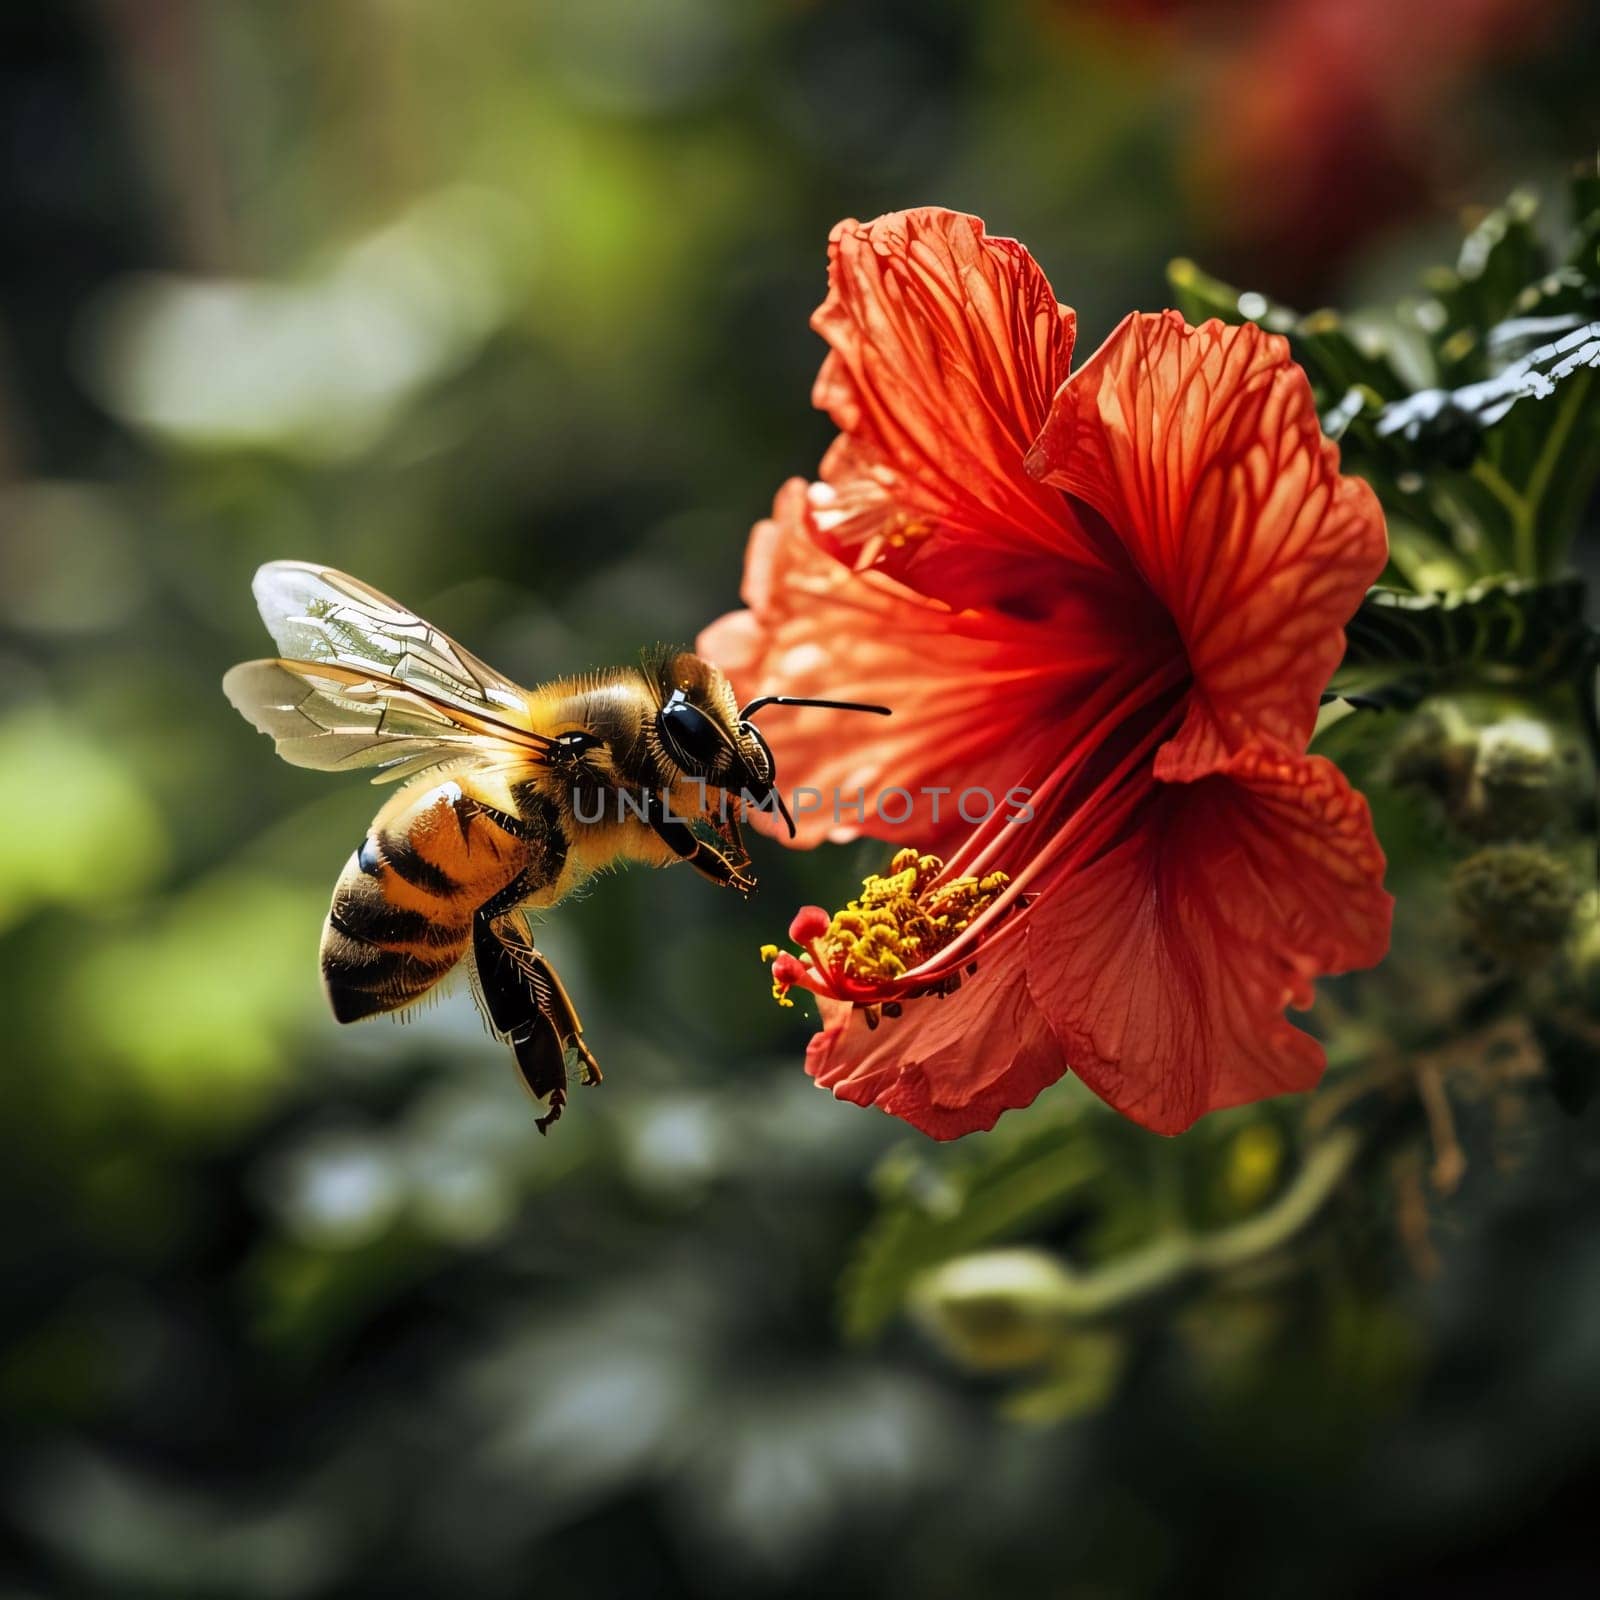 A bee on a red flower, blurred background, close-up view. Flowering flowers, a symbol of spring, new life. A joyful time of nature waking up to life.